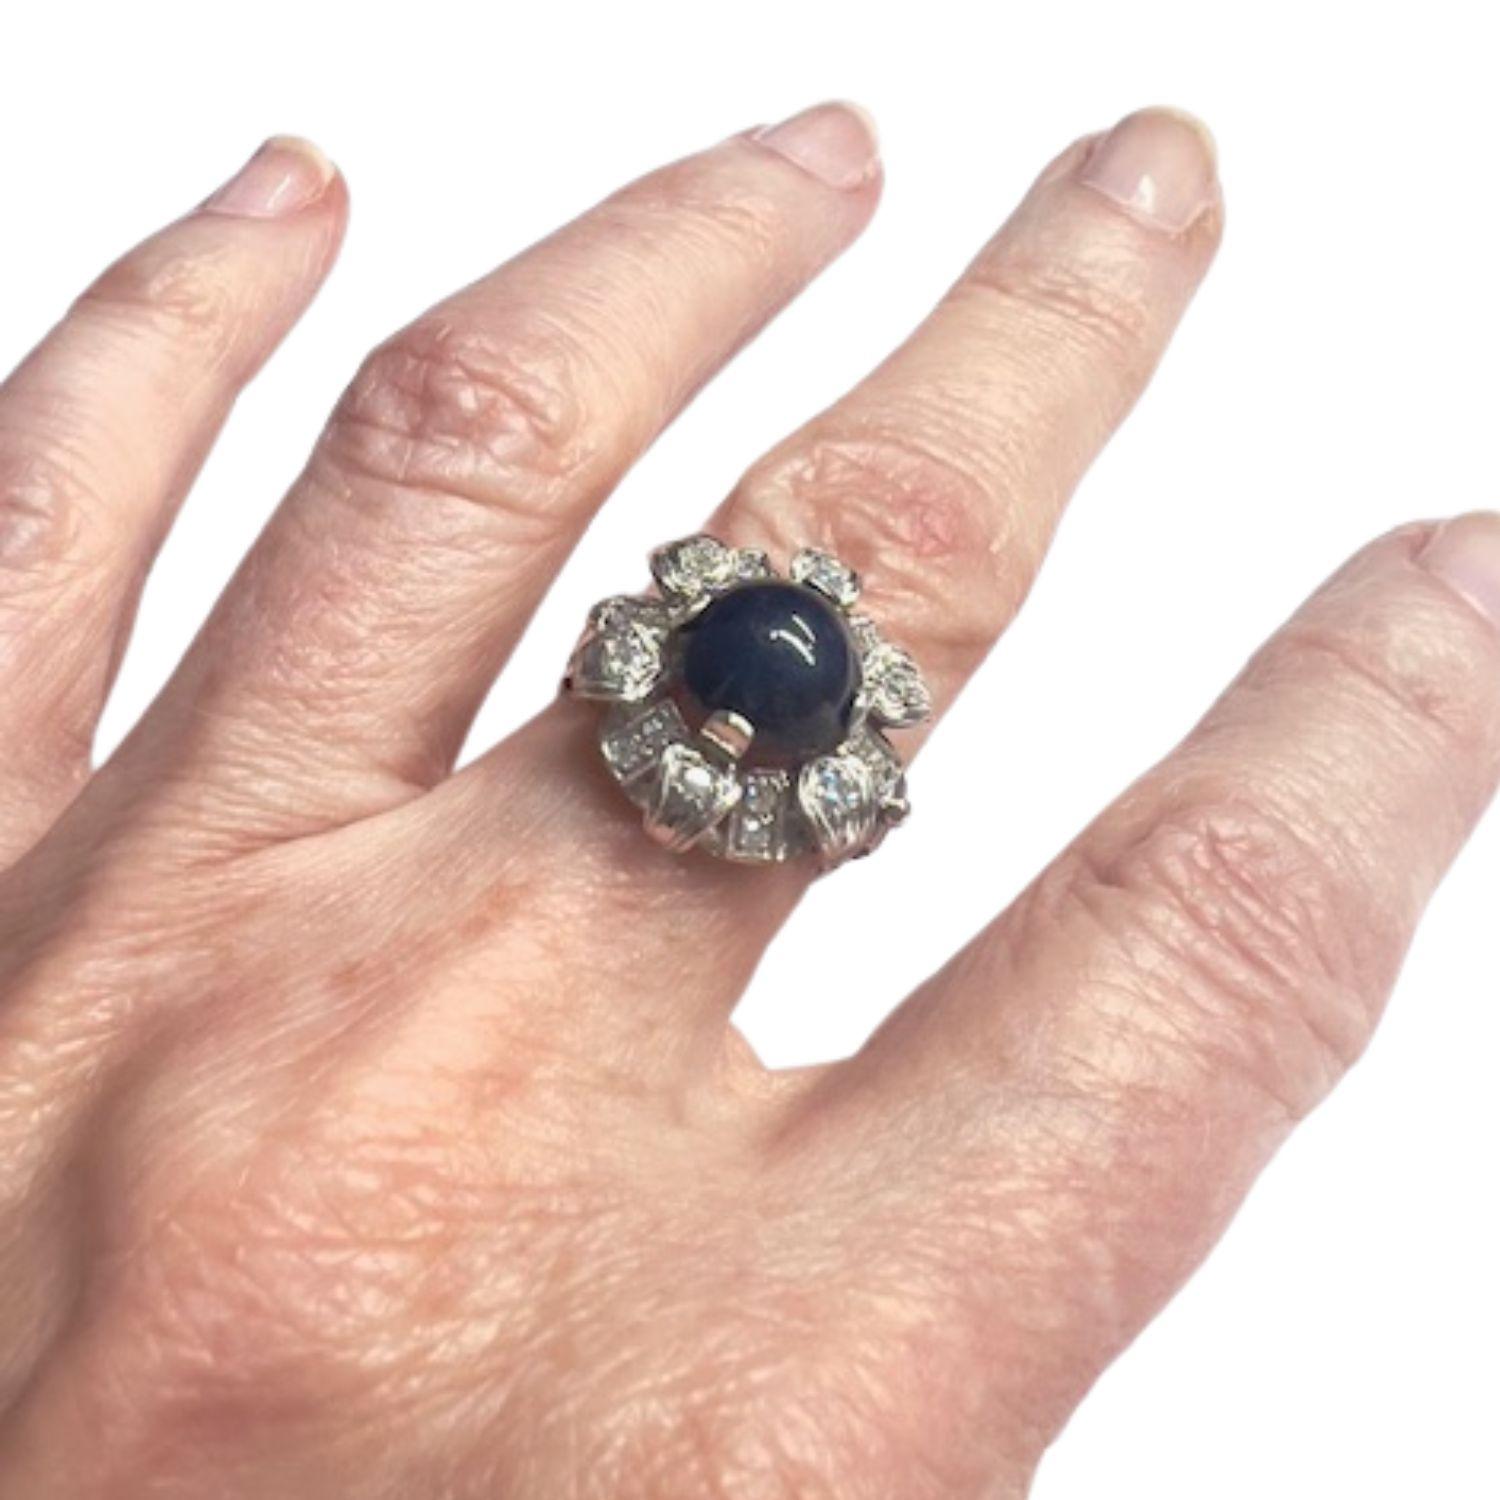 Single Cut 1930s-1935 Art Deco with Diamonds and Diffusion-Treated Sapphires 18k Gold Ring For Sale